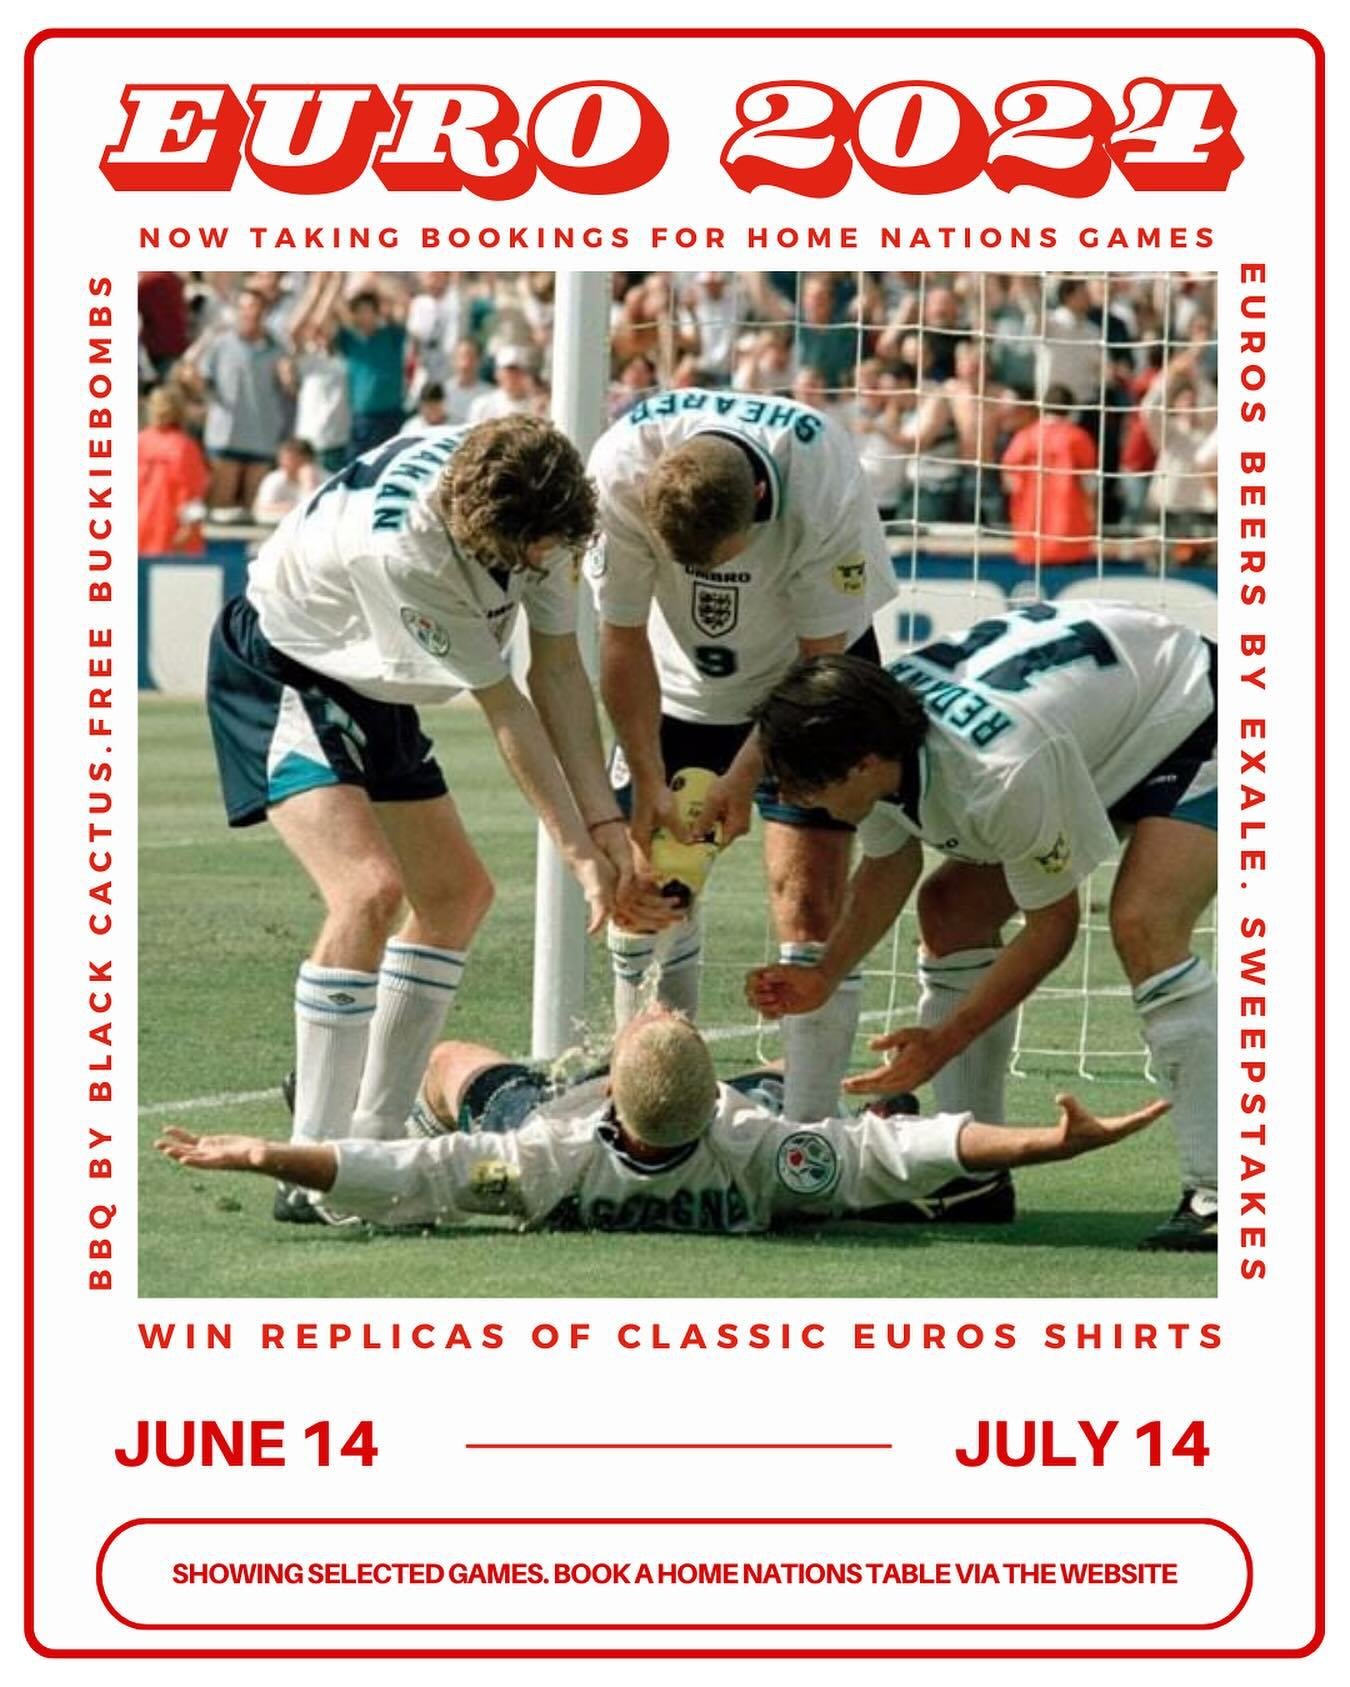 ⚽️ EURO 2024 ⚽️

Bookings are open for the Euro home nation group games, 3 screens (1 outside in the beer garden), a specially brewed lager, bbq from @black.cactus.bbq , competitions (we have 10 stunning vintage Euro shirts!) free shots and more. All